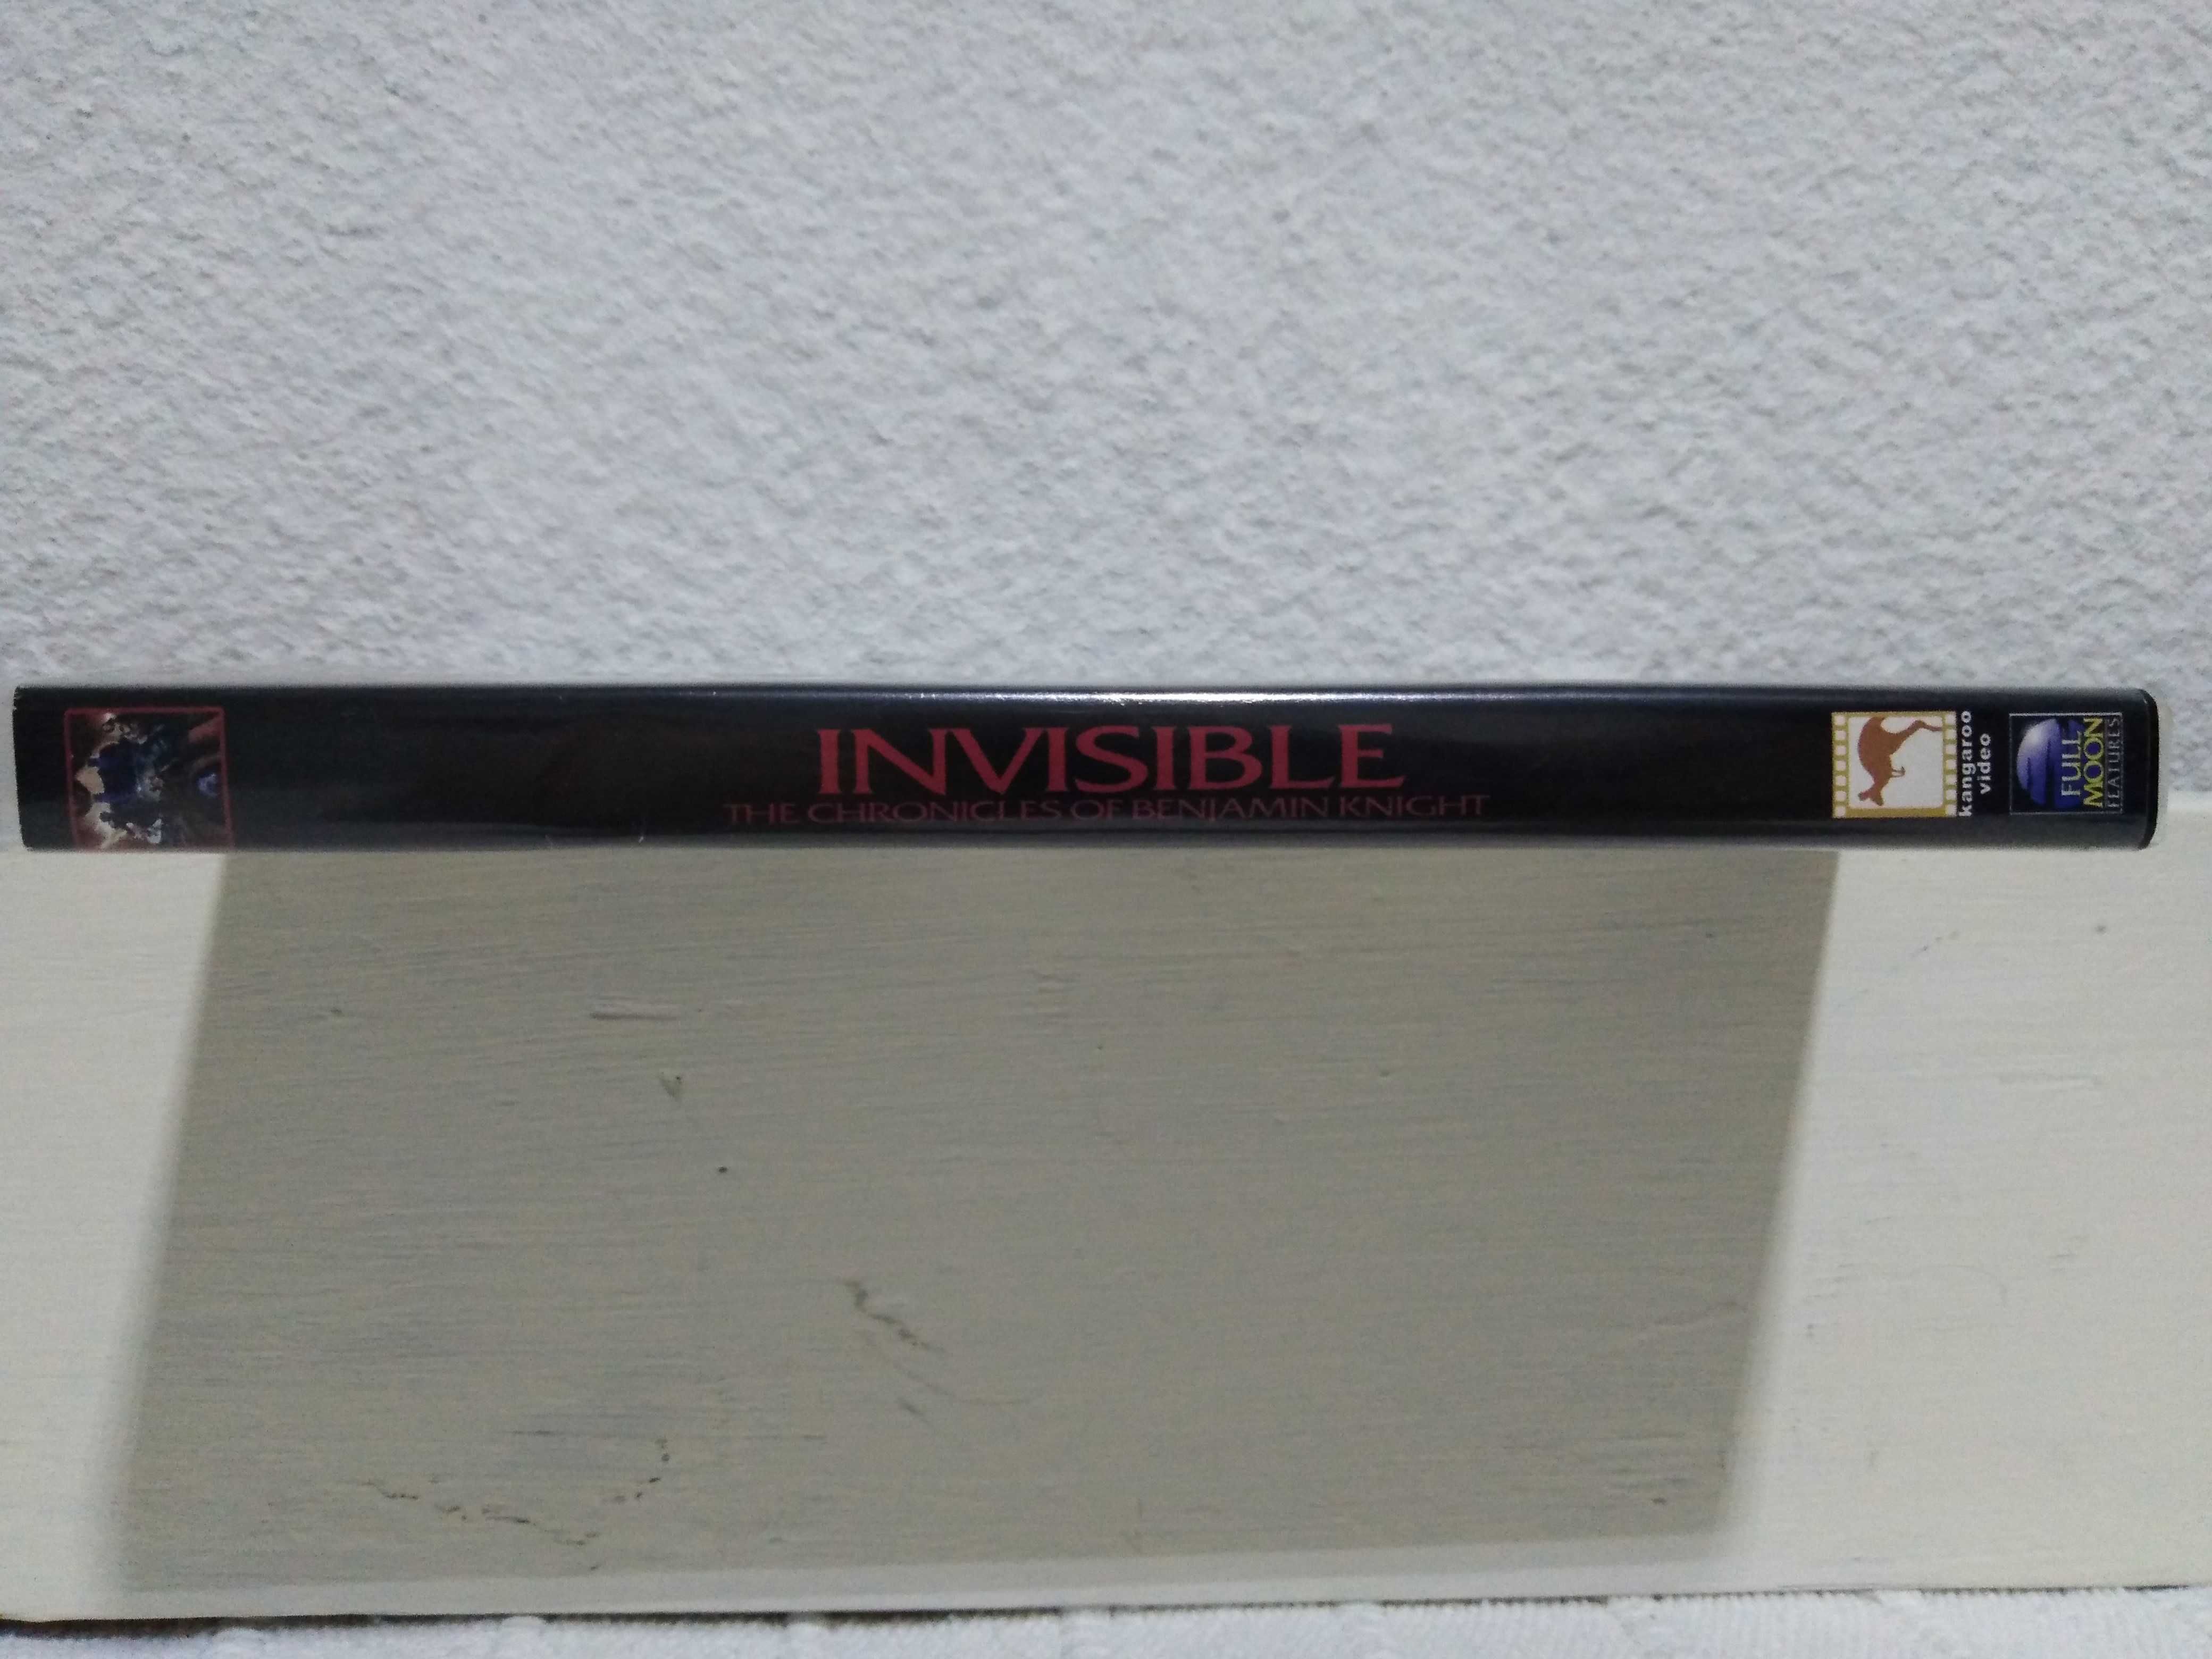 Invisible- The Chronicles of Benjamin Knight (DVD)